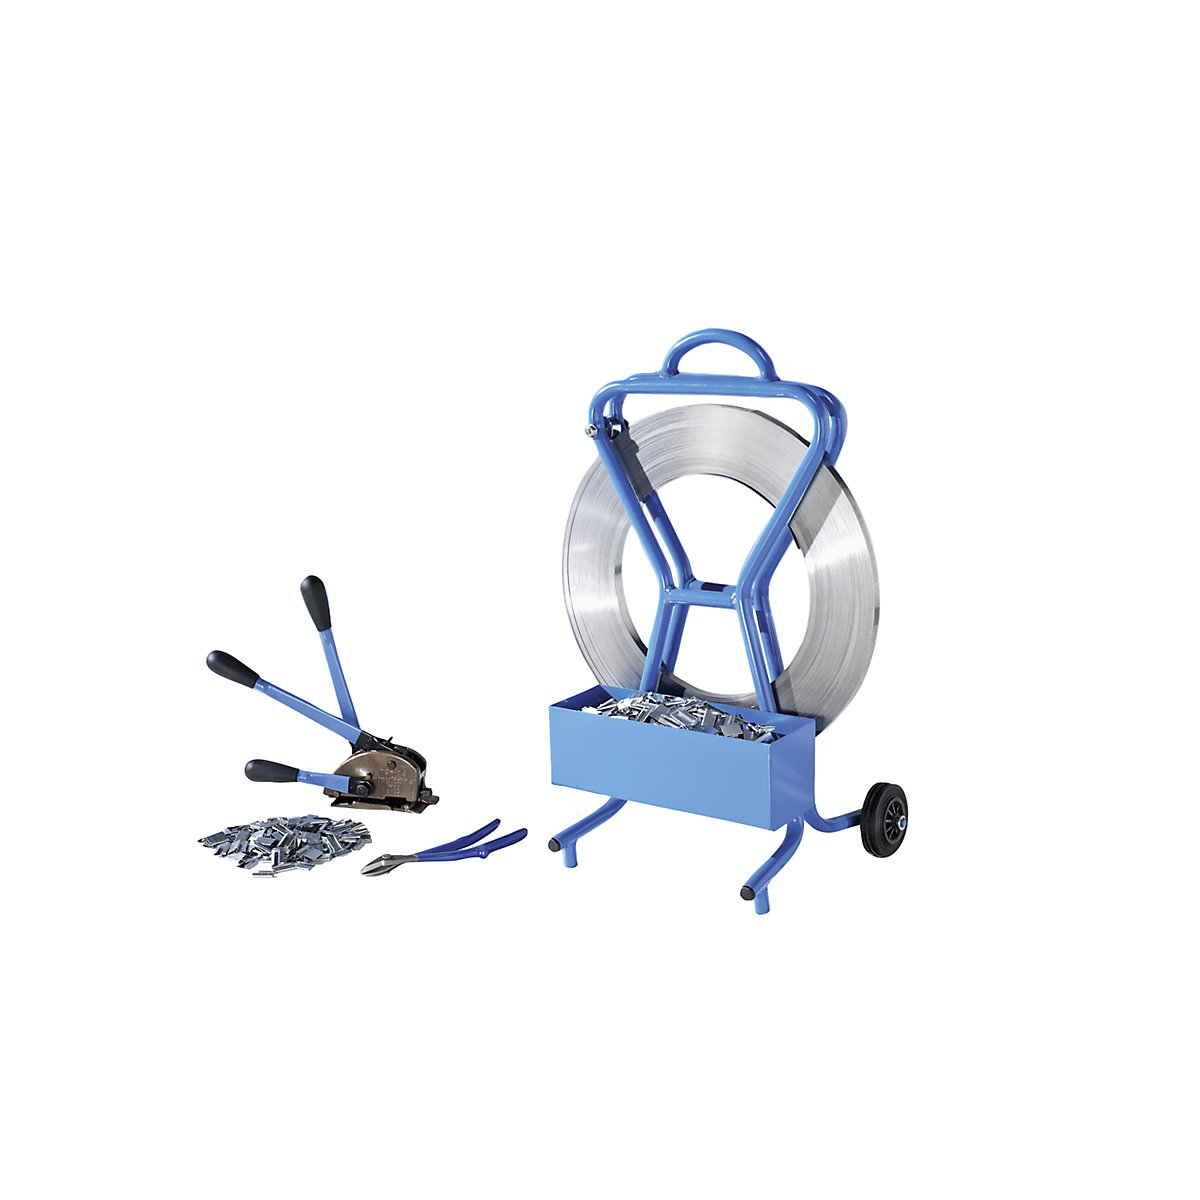 Strapping set, steel strapping: tensioning and sealing tool, cutter, strap  dispenser, strap, seals